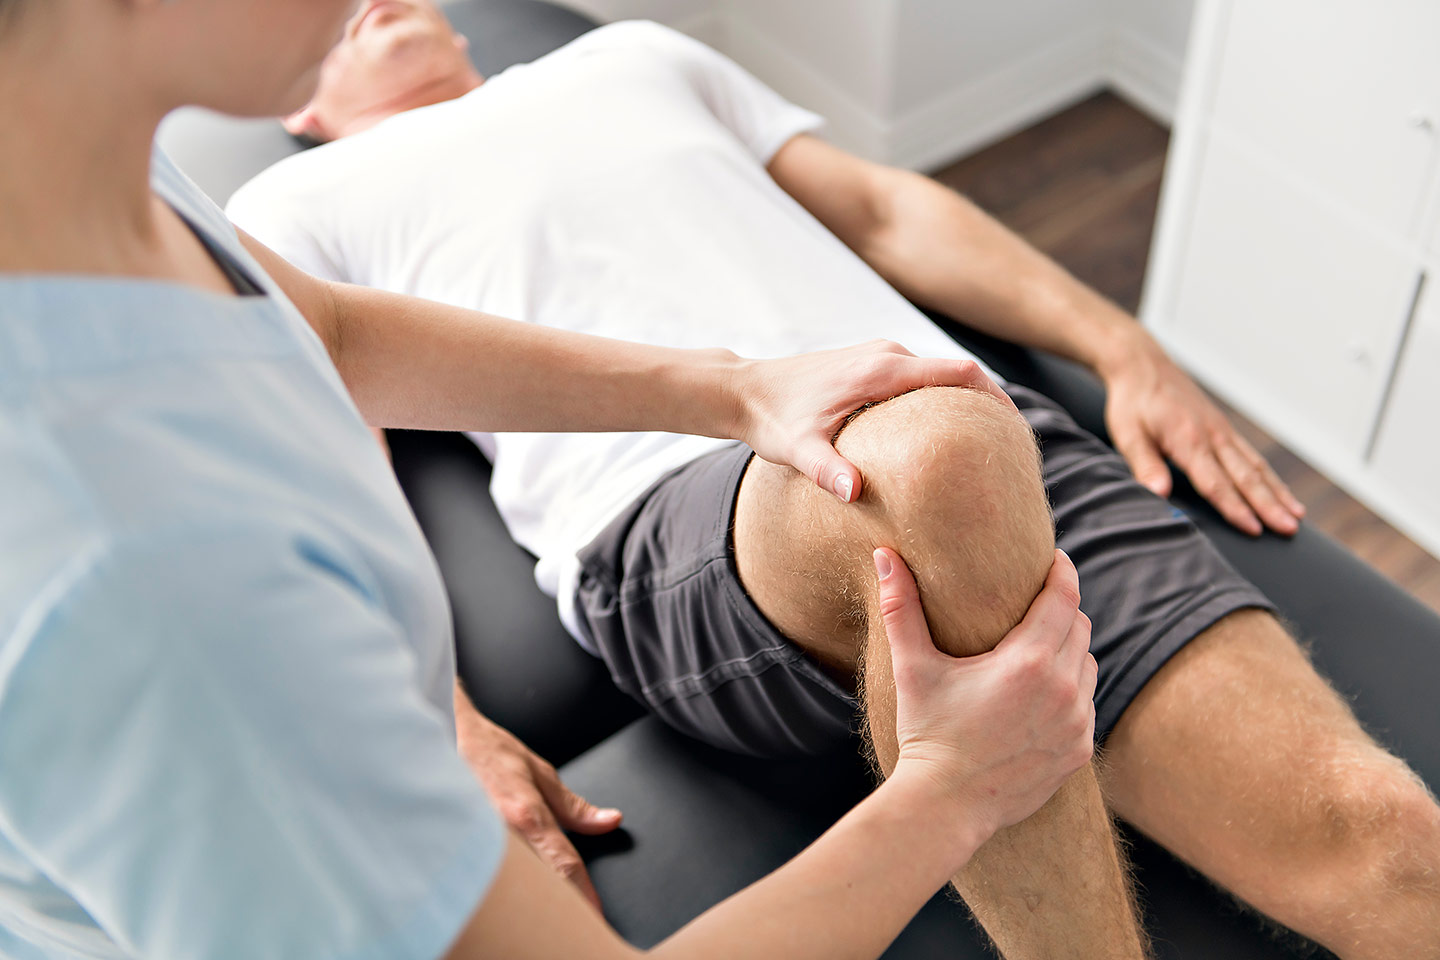 How long does a physiotherapy treatment take?